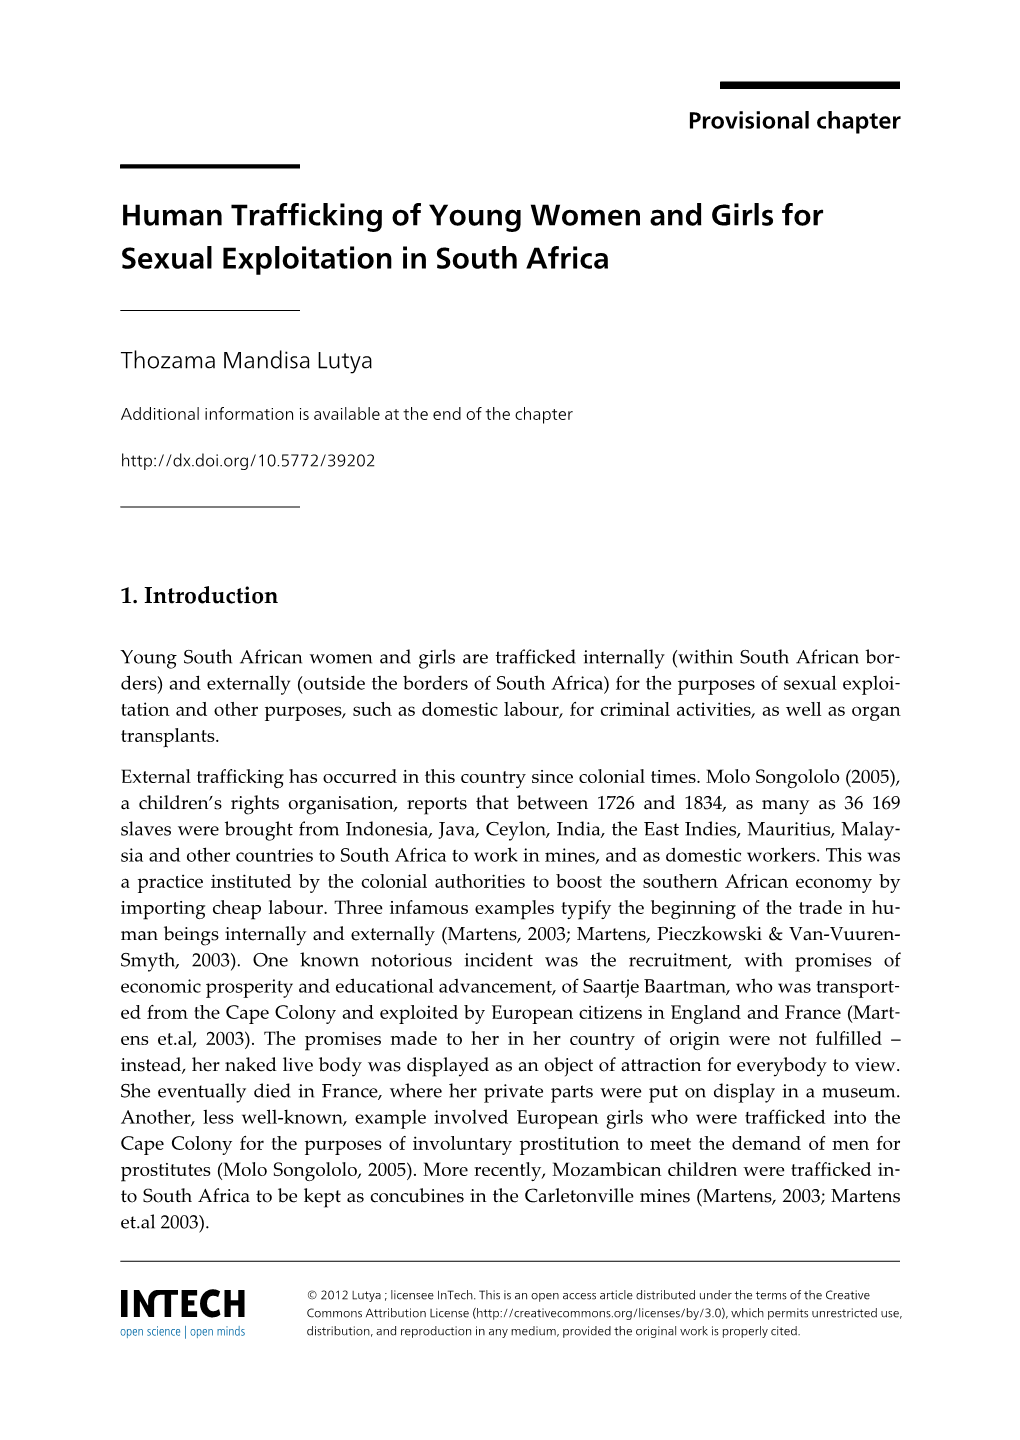 Human Trafficking of Young Women and Girls for Sexual Exploitation in South Africa